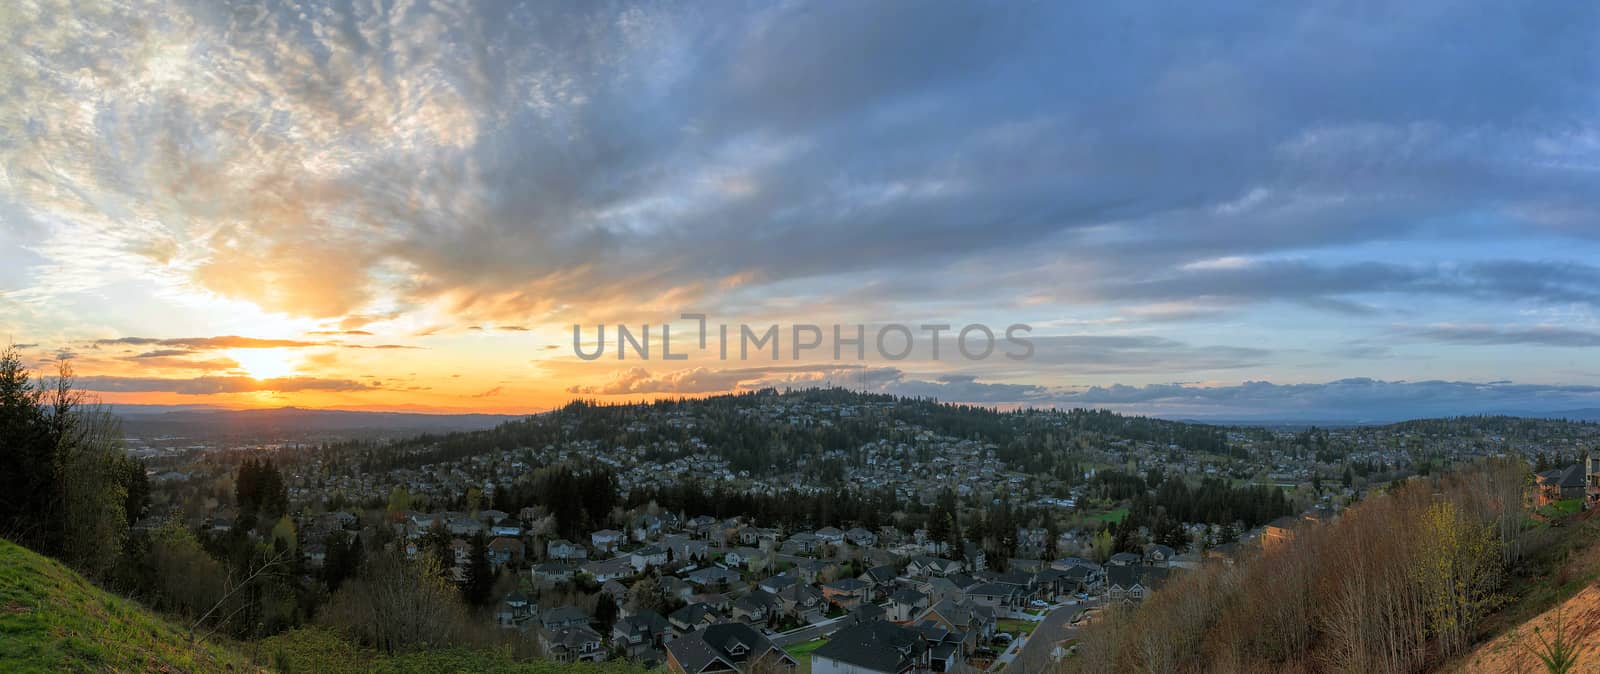 Sunset Over Happy Valley Oregon Residential Suburbs Panorama